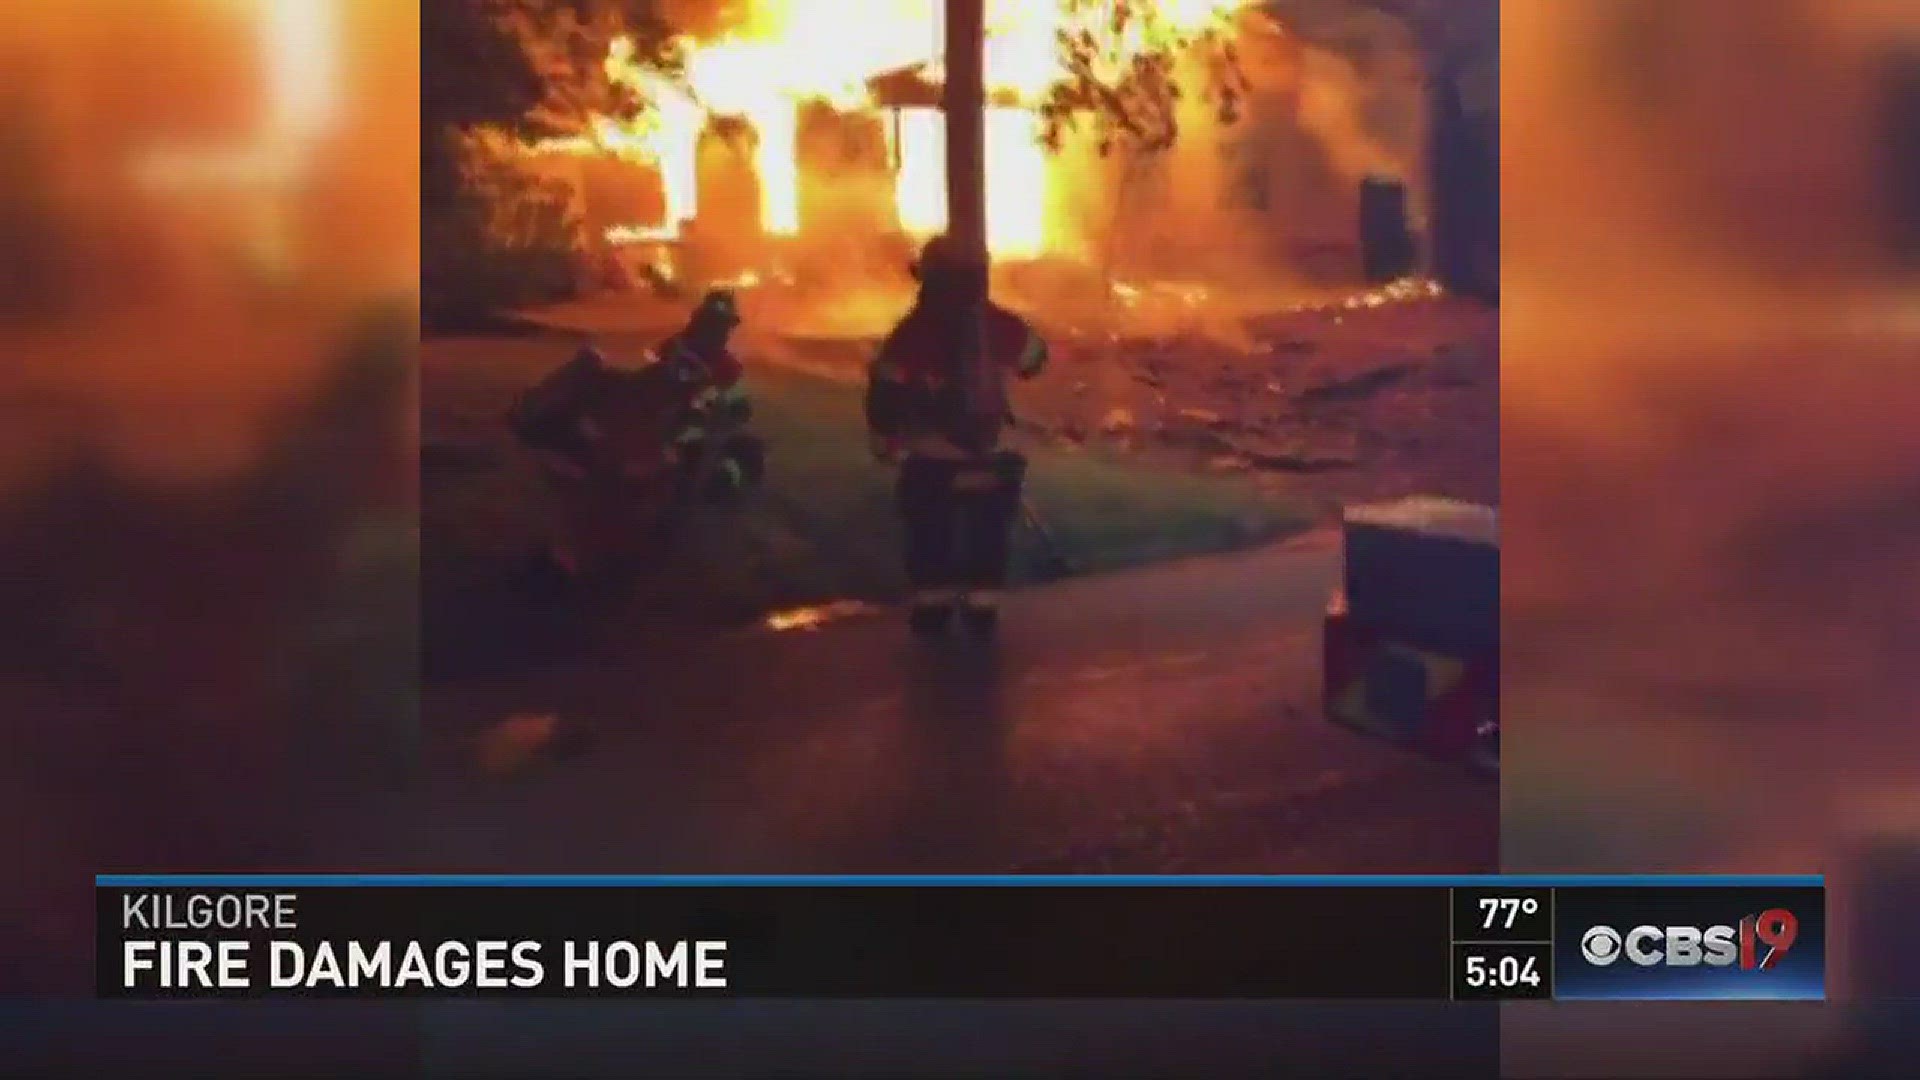 A fire destroyed a Kilgore home that was later confirmed to be owned by a pregnant woman missing since August 20.